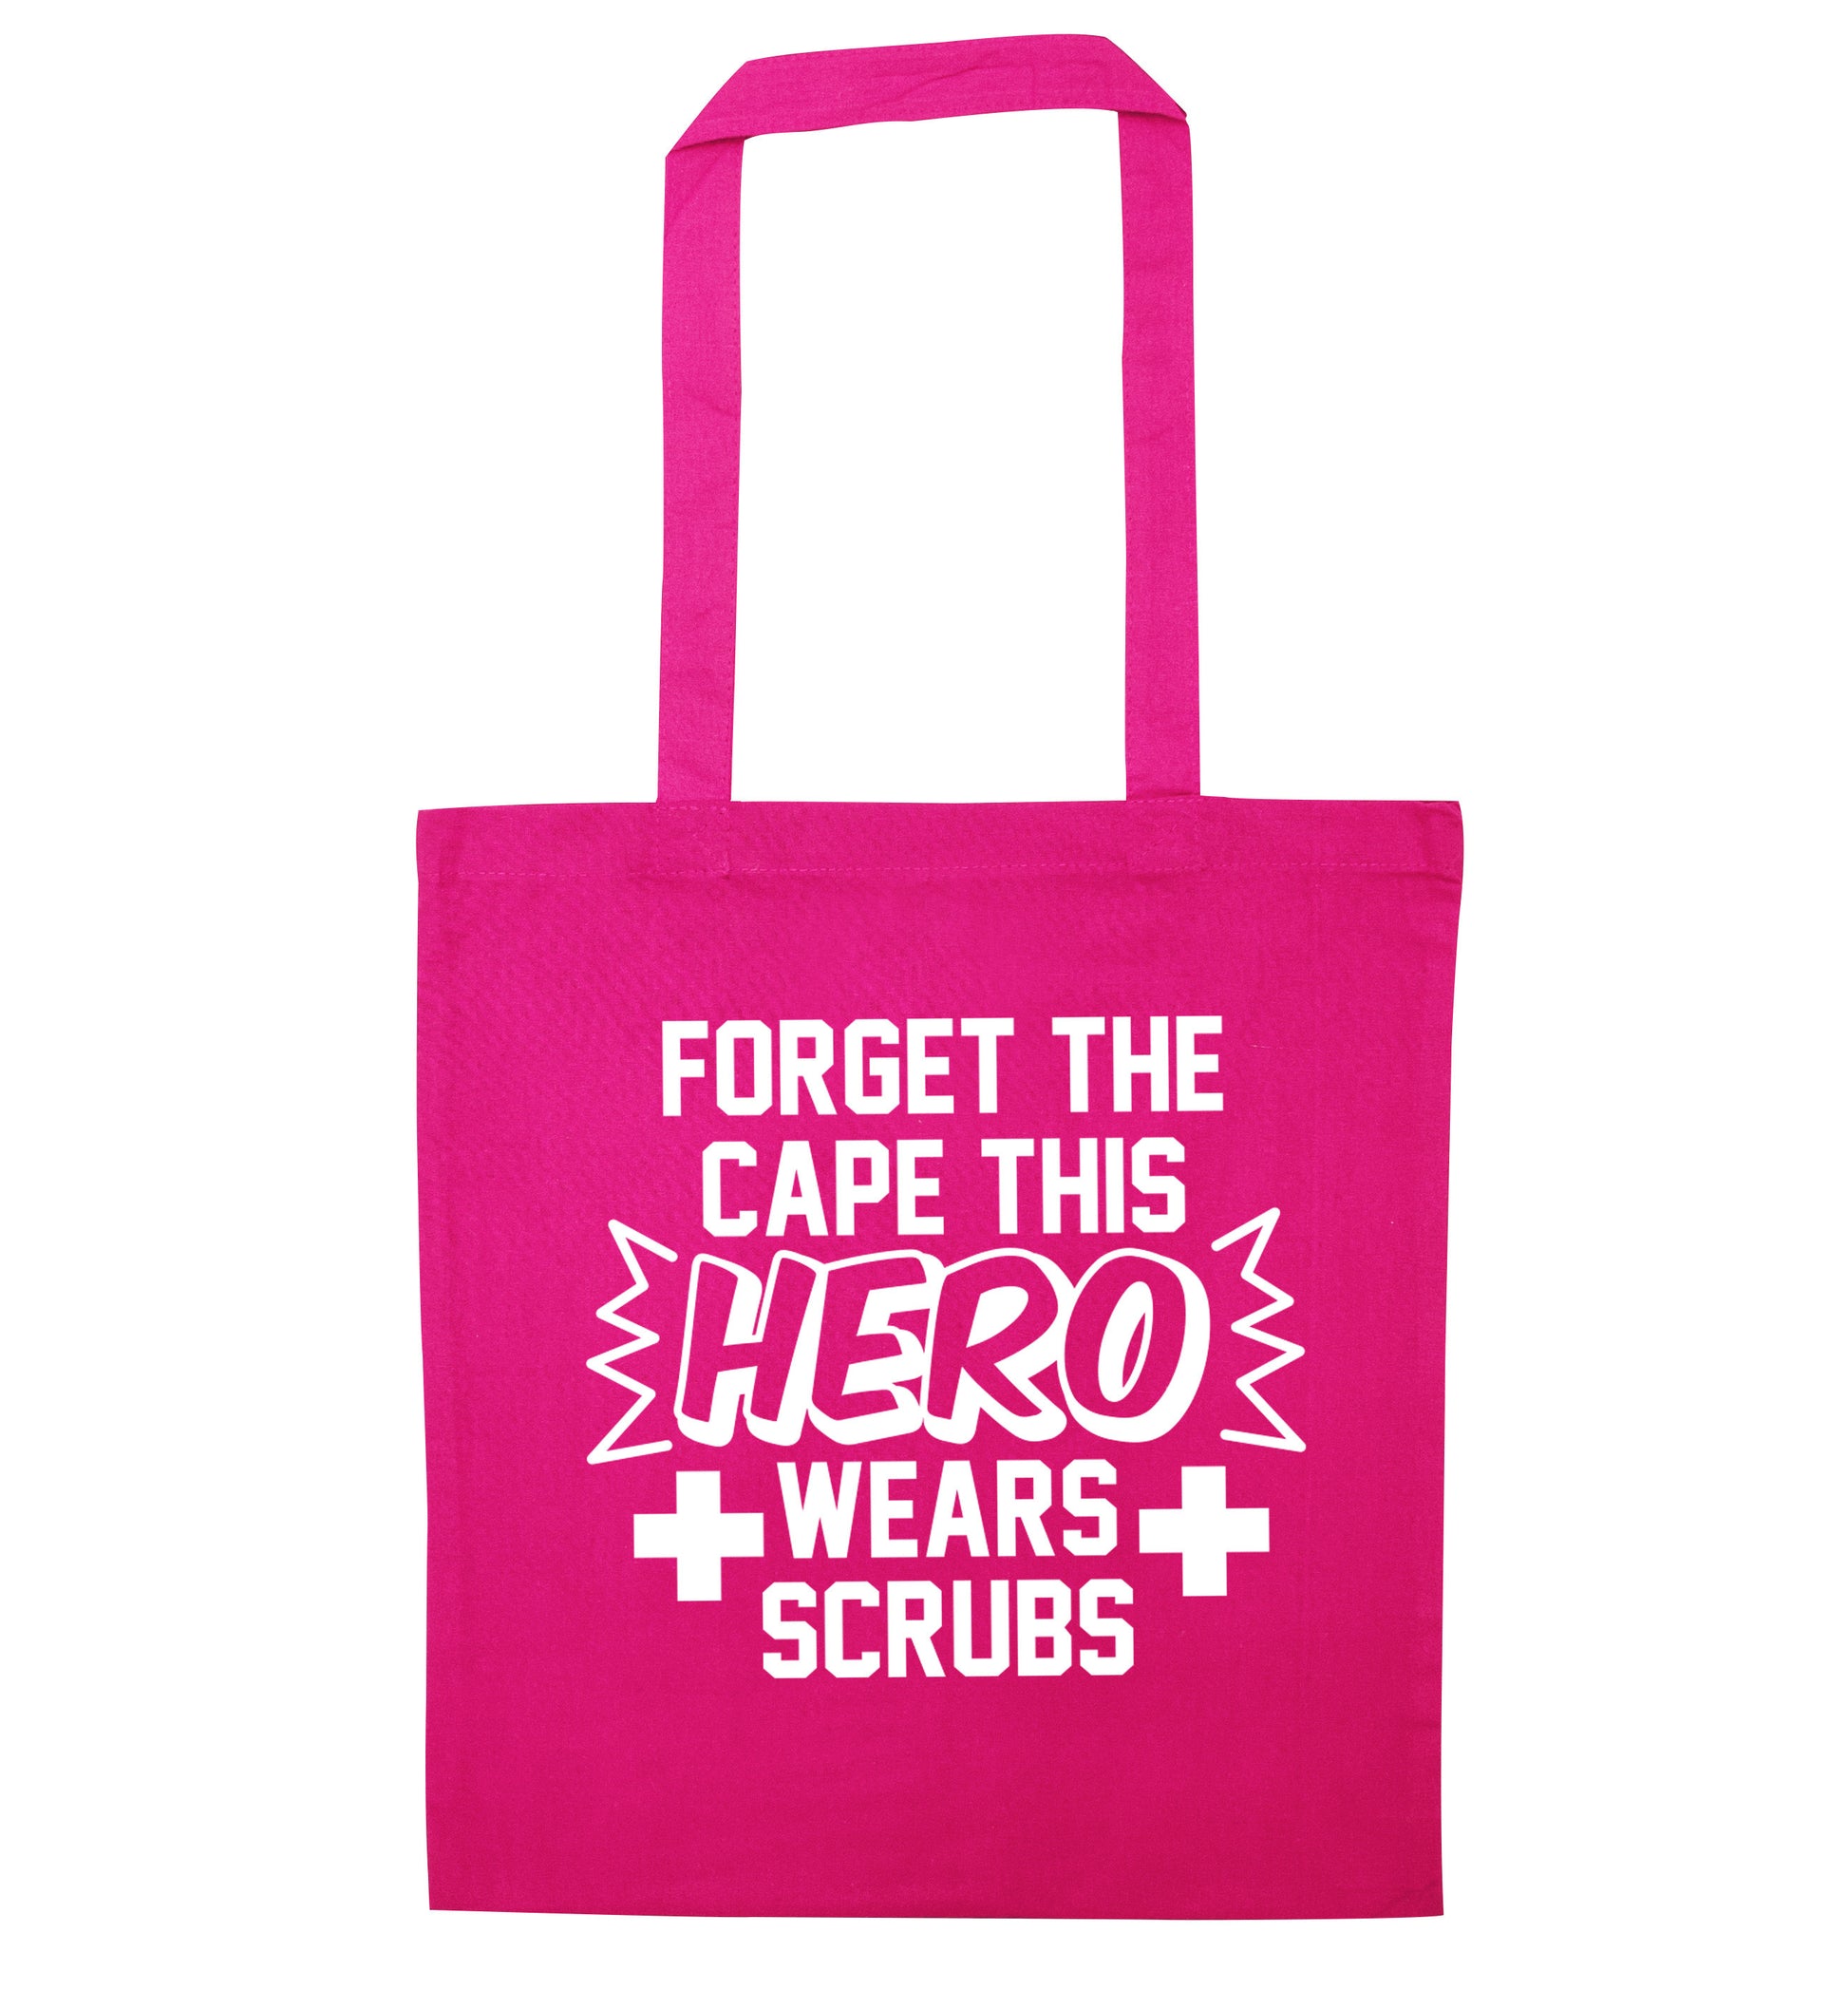 Forget the cape this hero wears scrubs pink tote bag